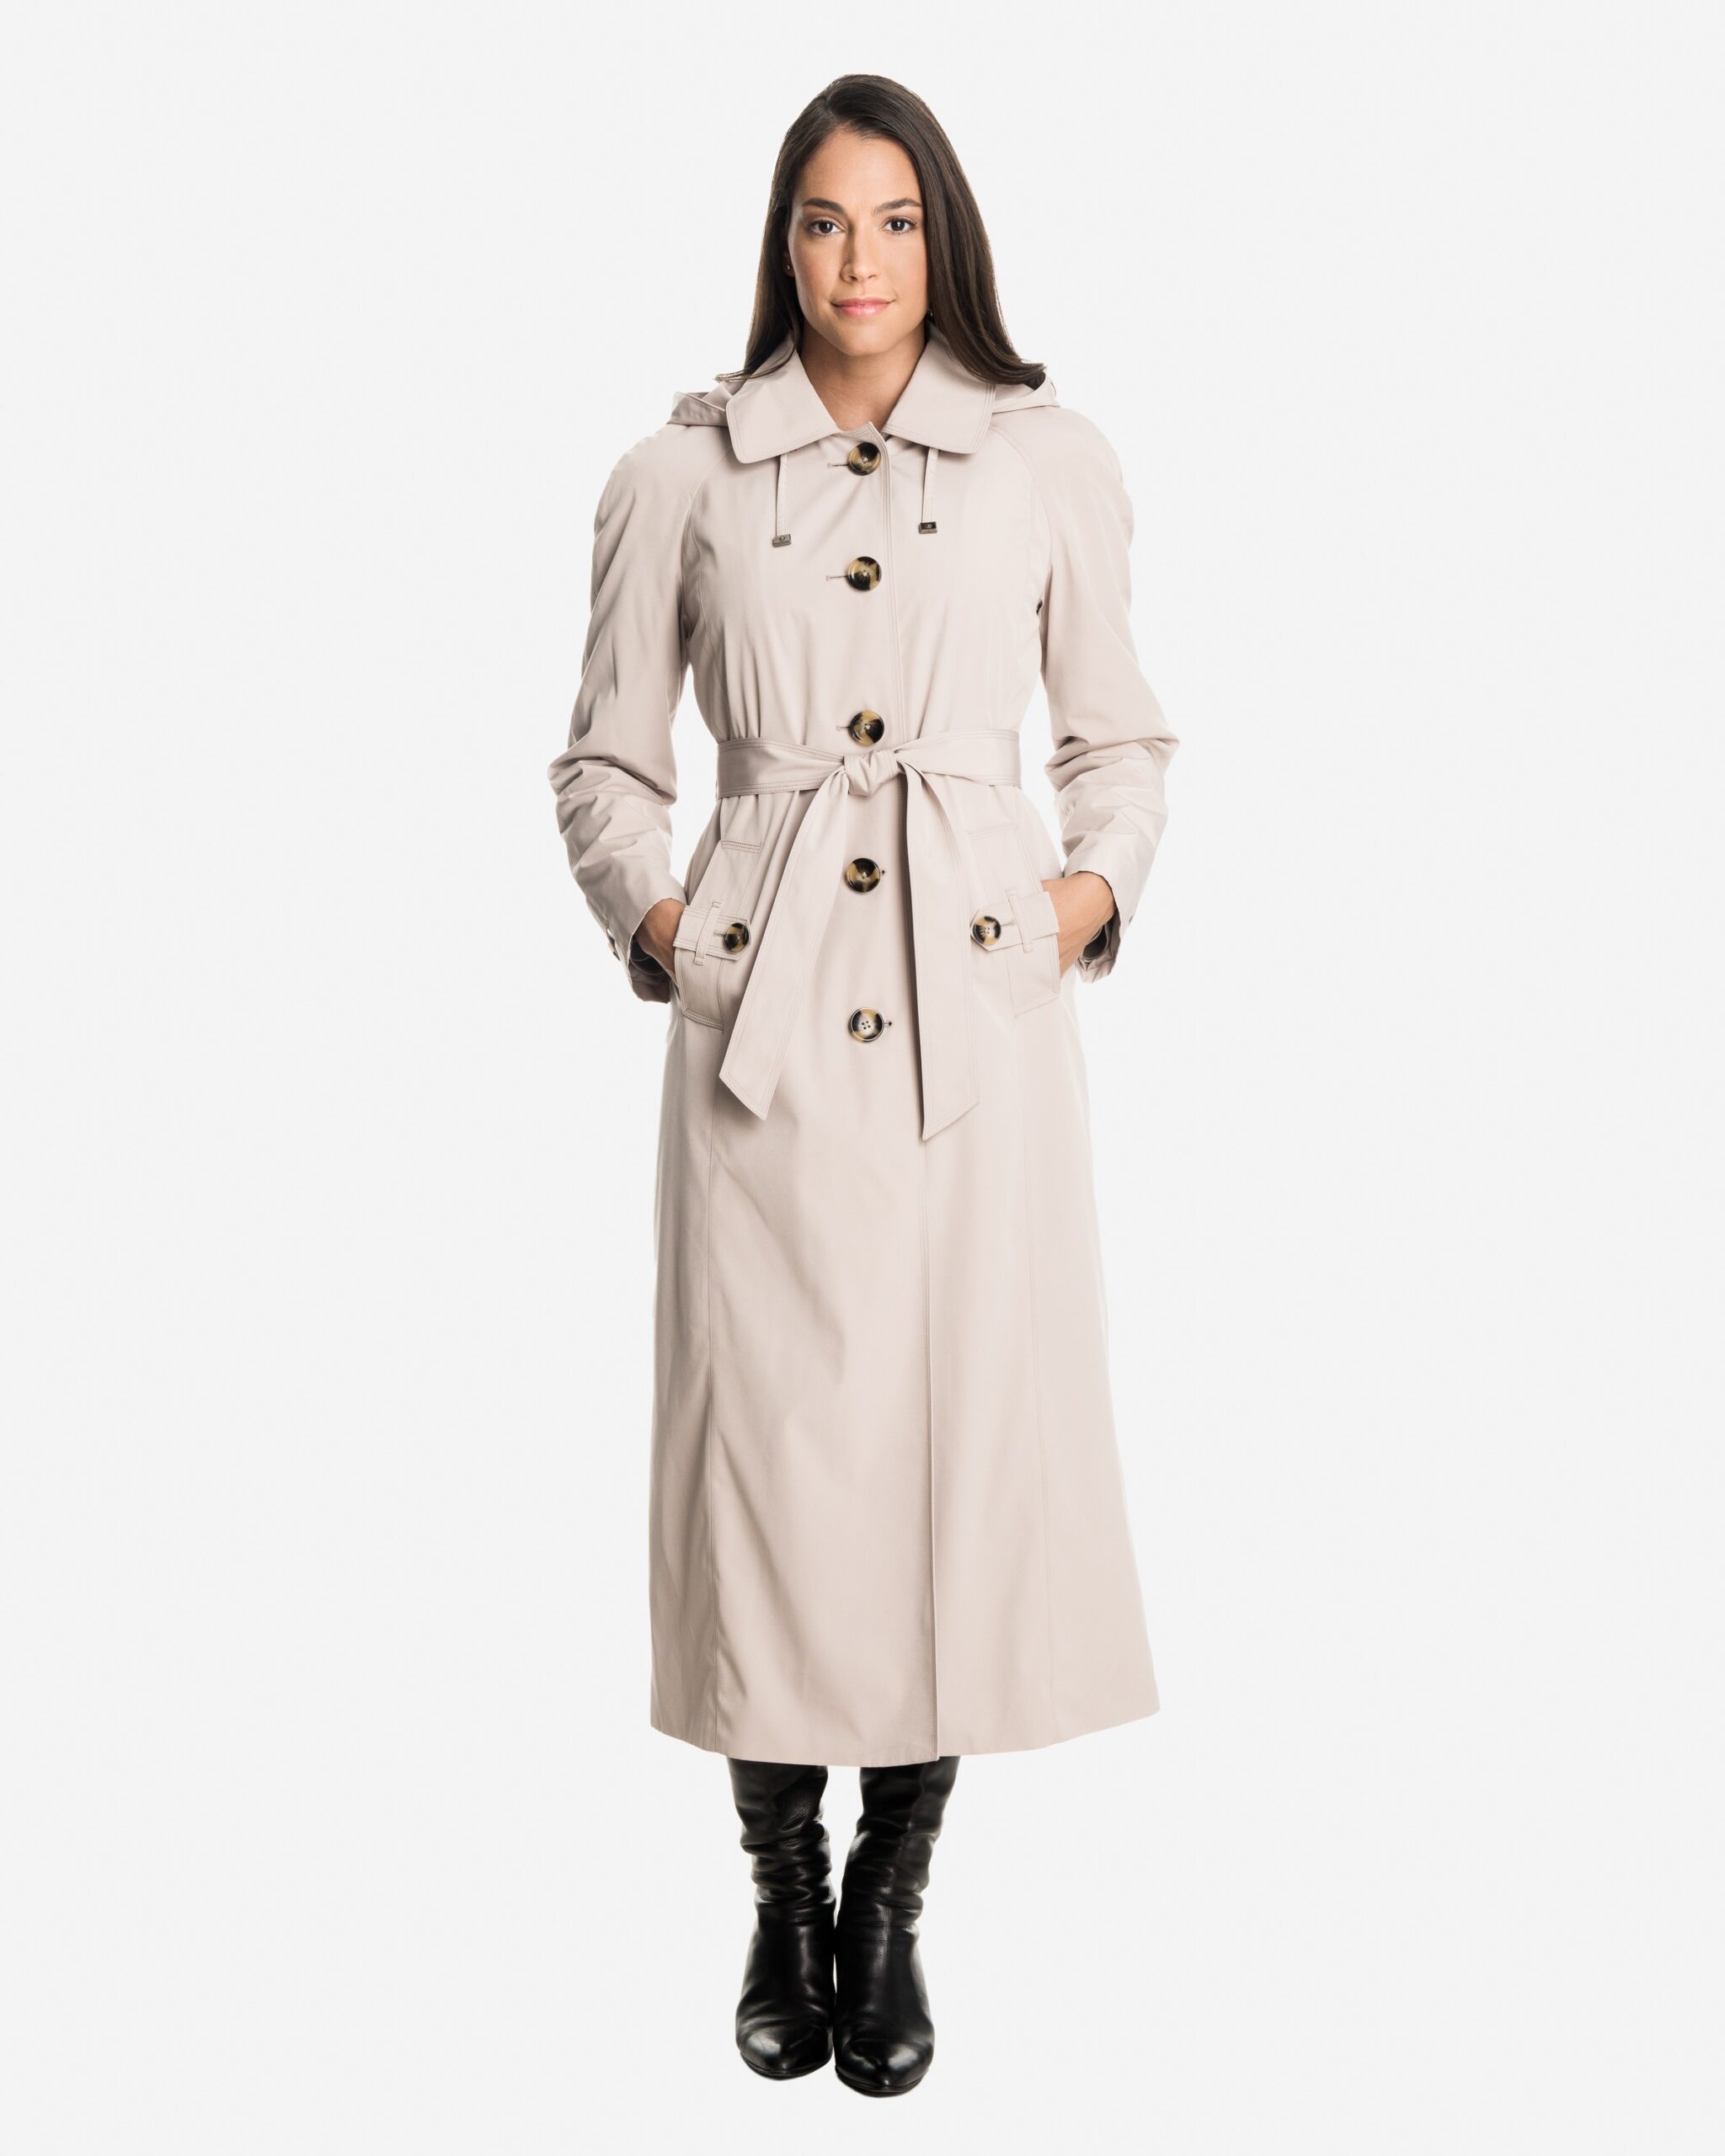 Stay dry as well as stylish this rainy  season with womens raincoats